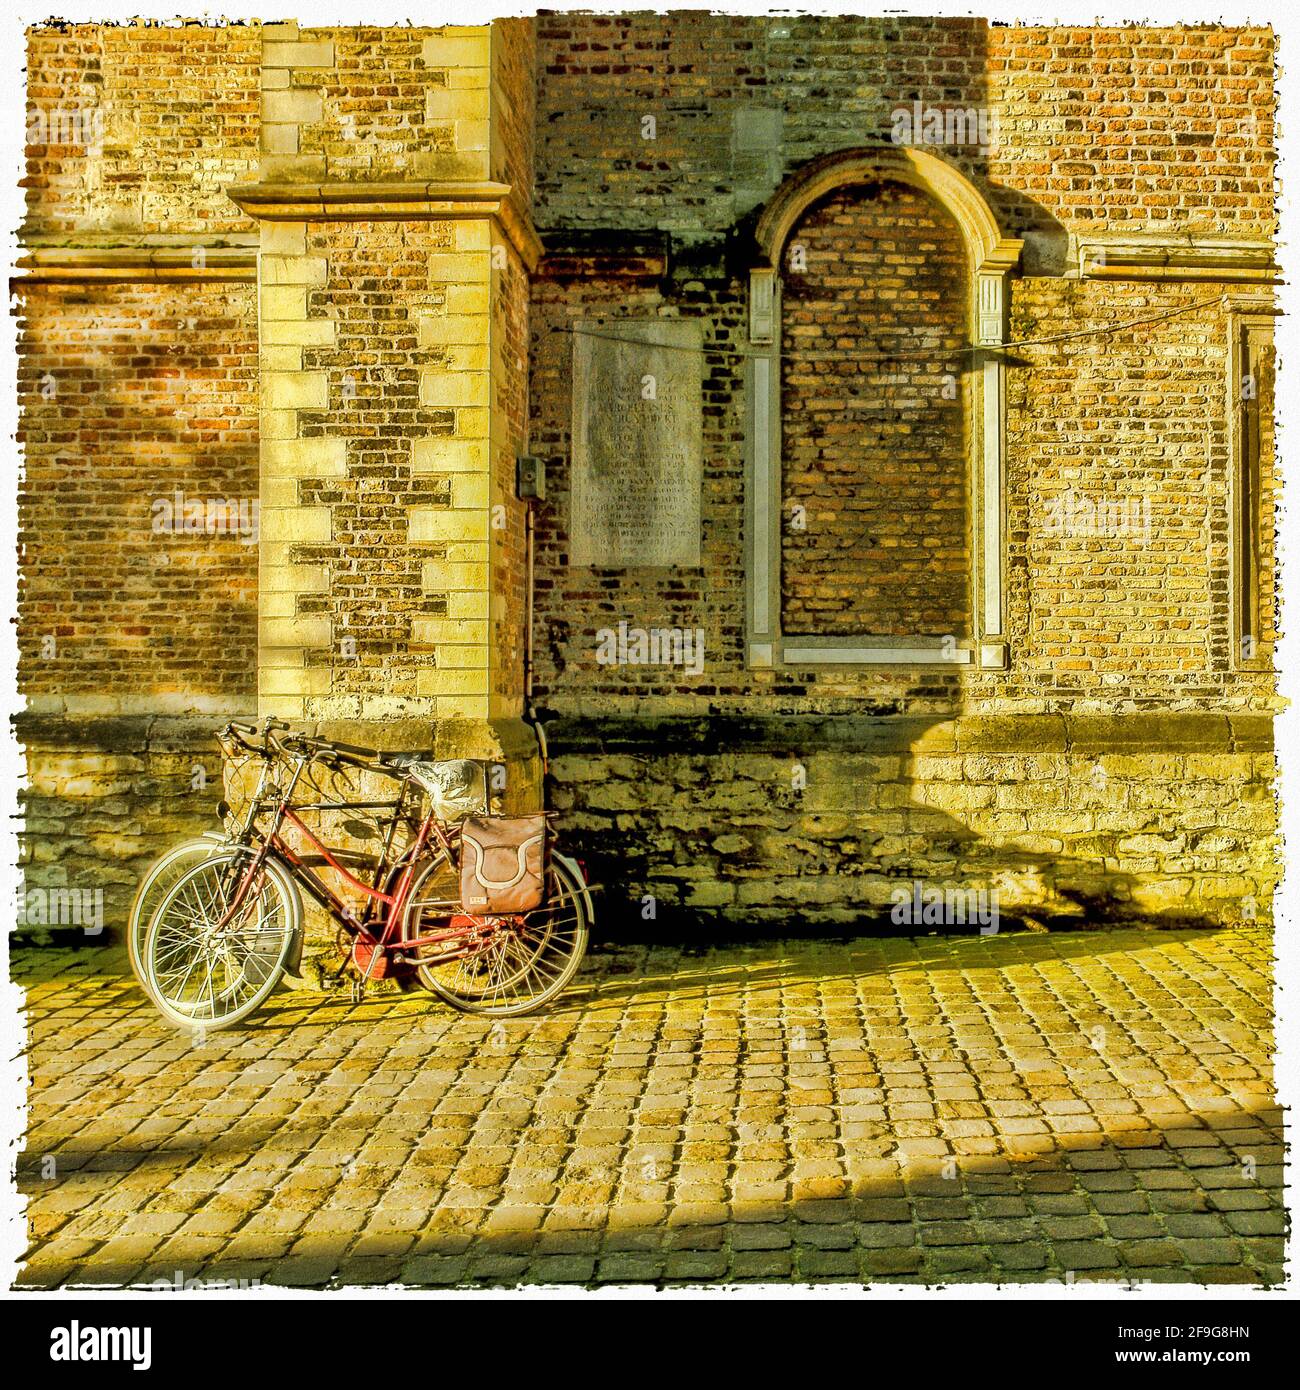 Abandoned old bicycle in the old part of town Stock Photo